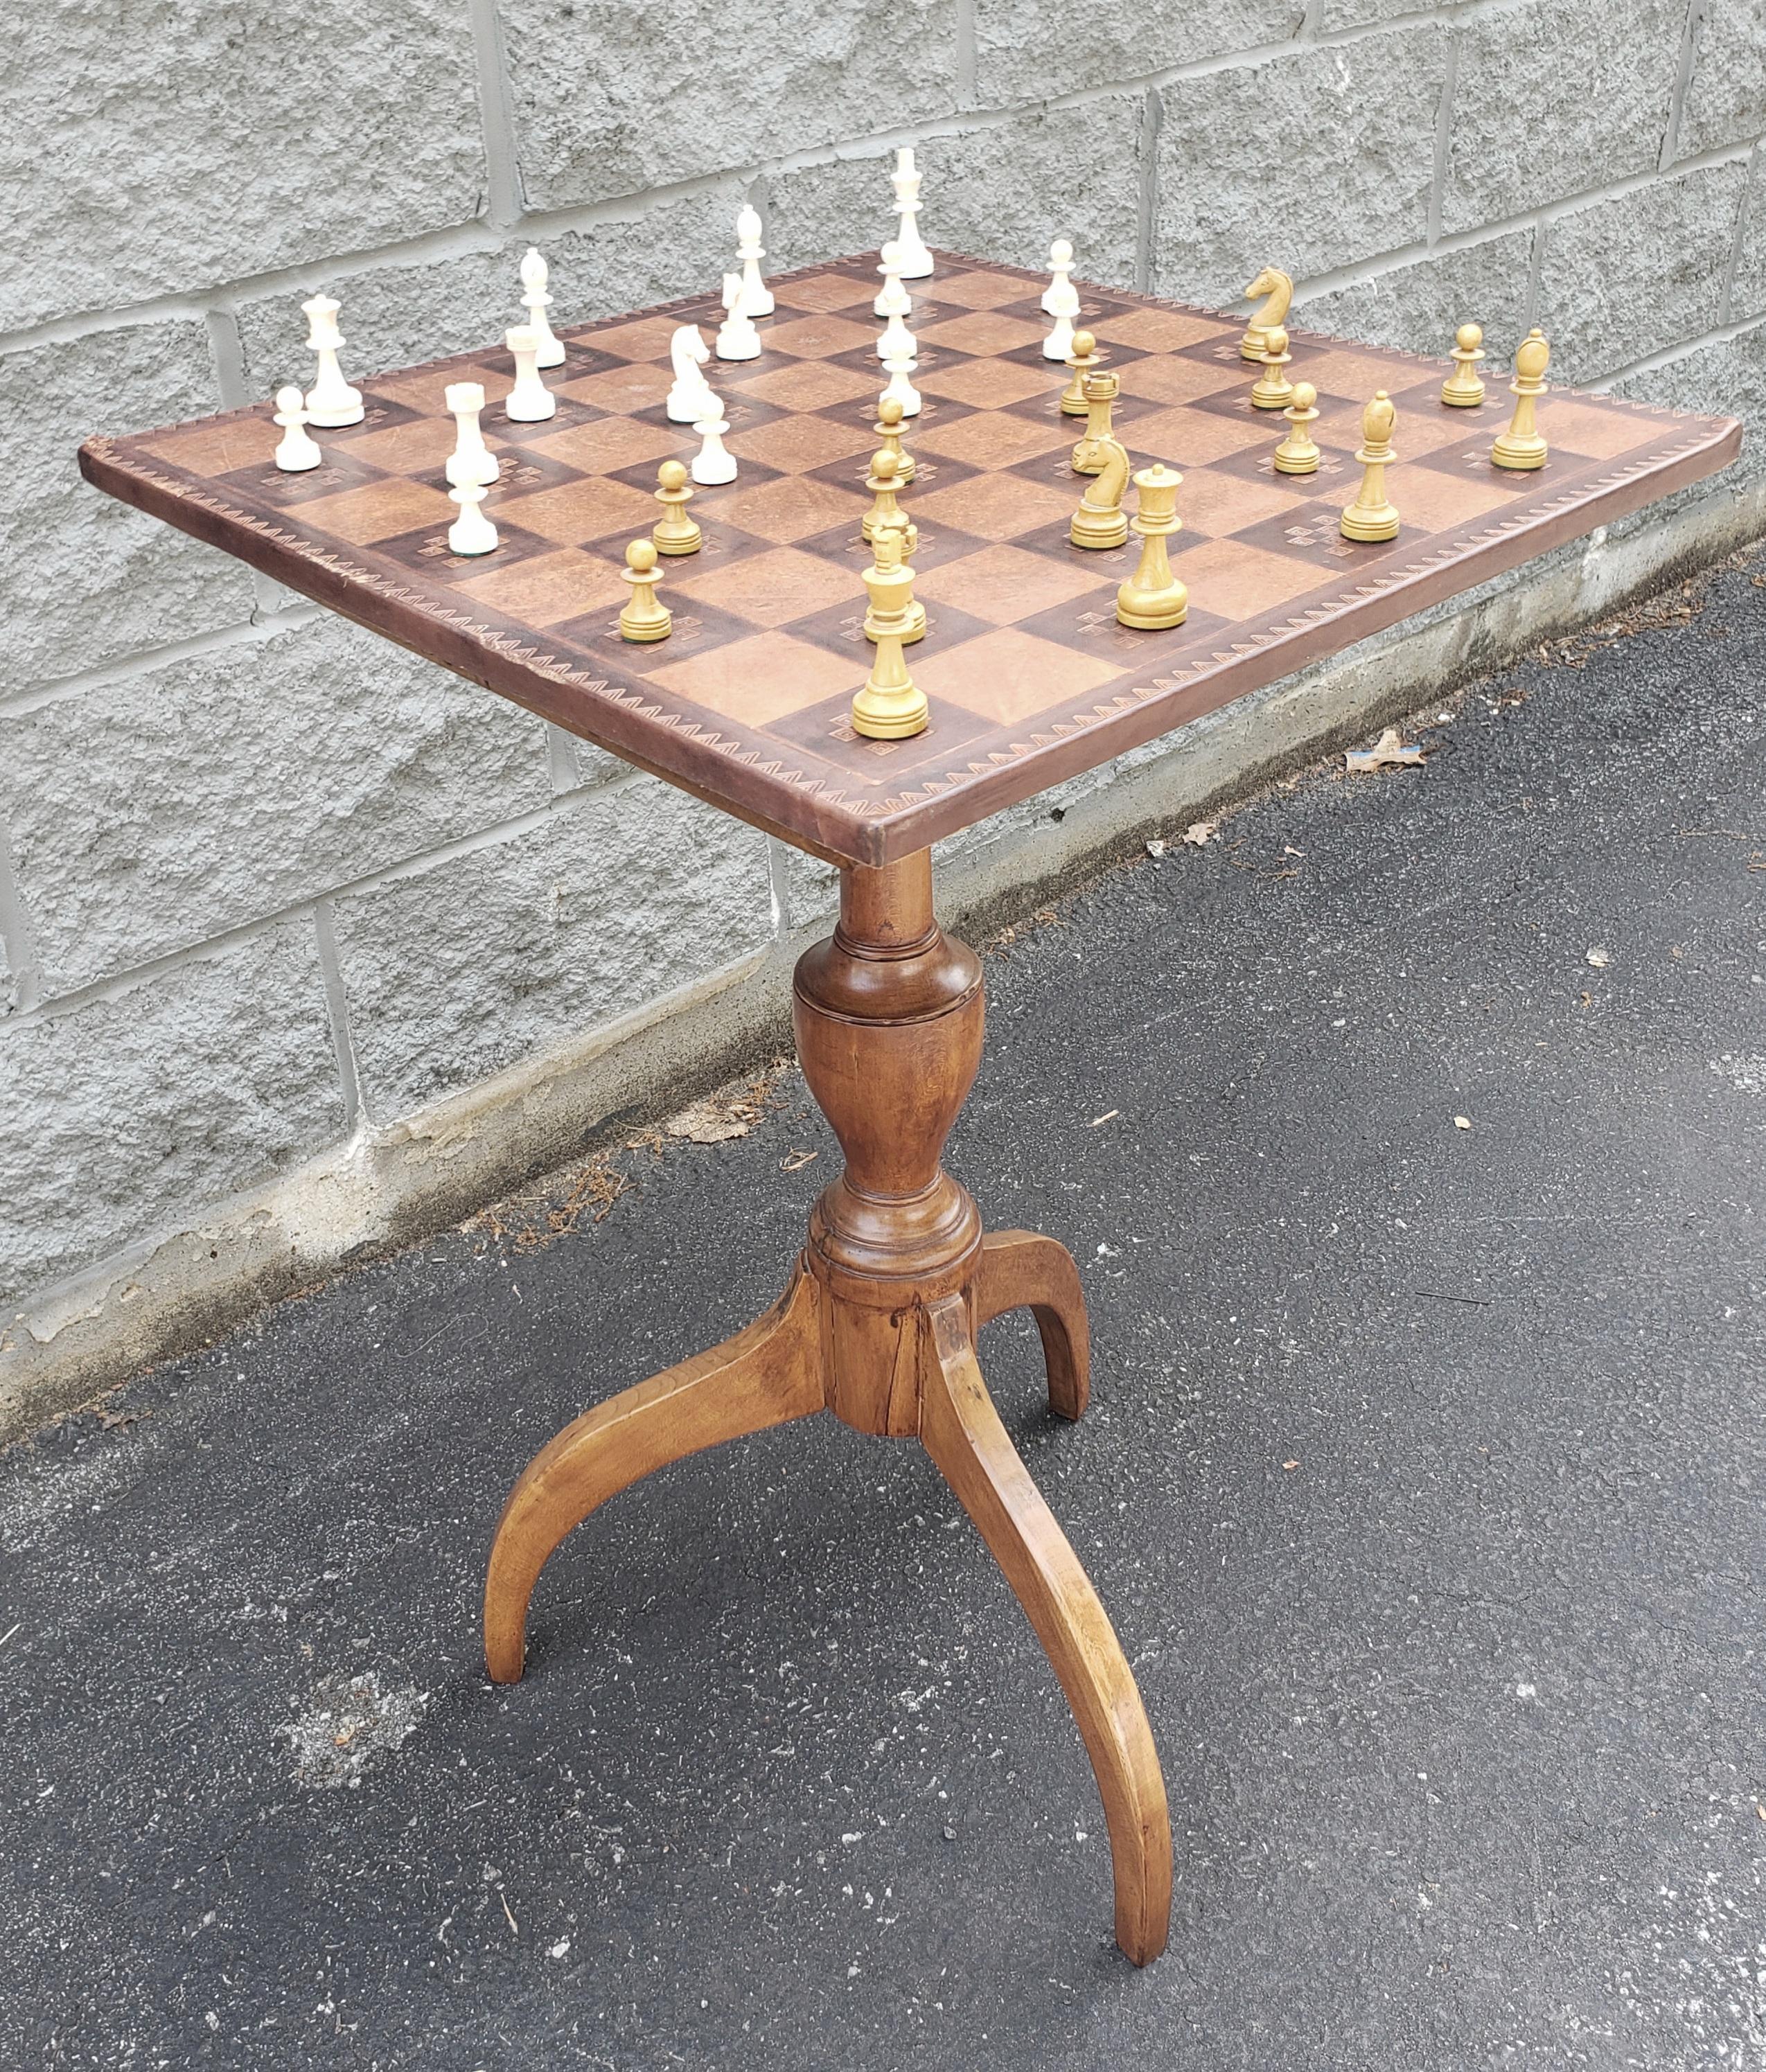 19th Century Spider Legs Maple Table & Leather Top Chess Board and Pieces Set For Sale 5